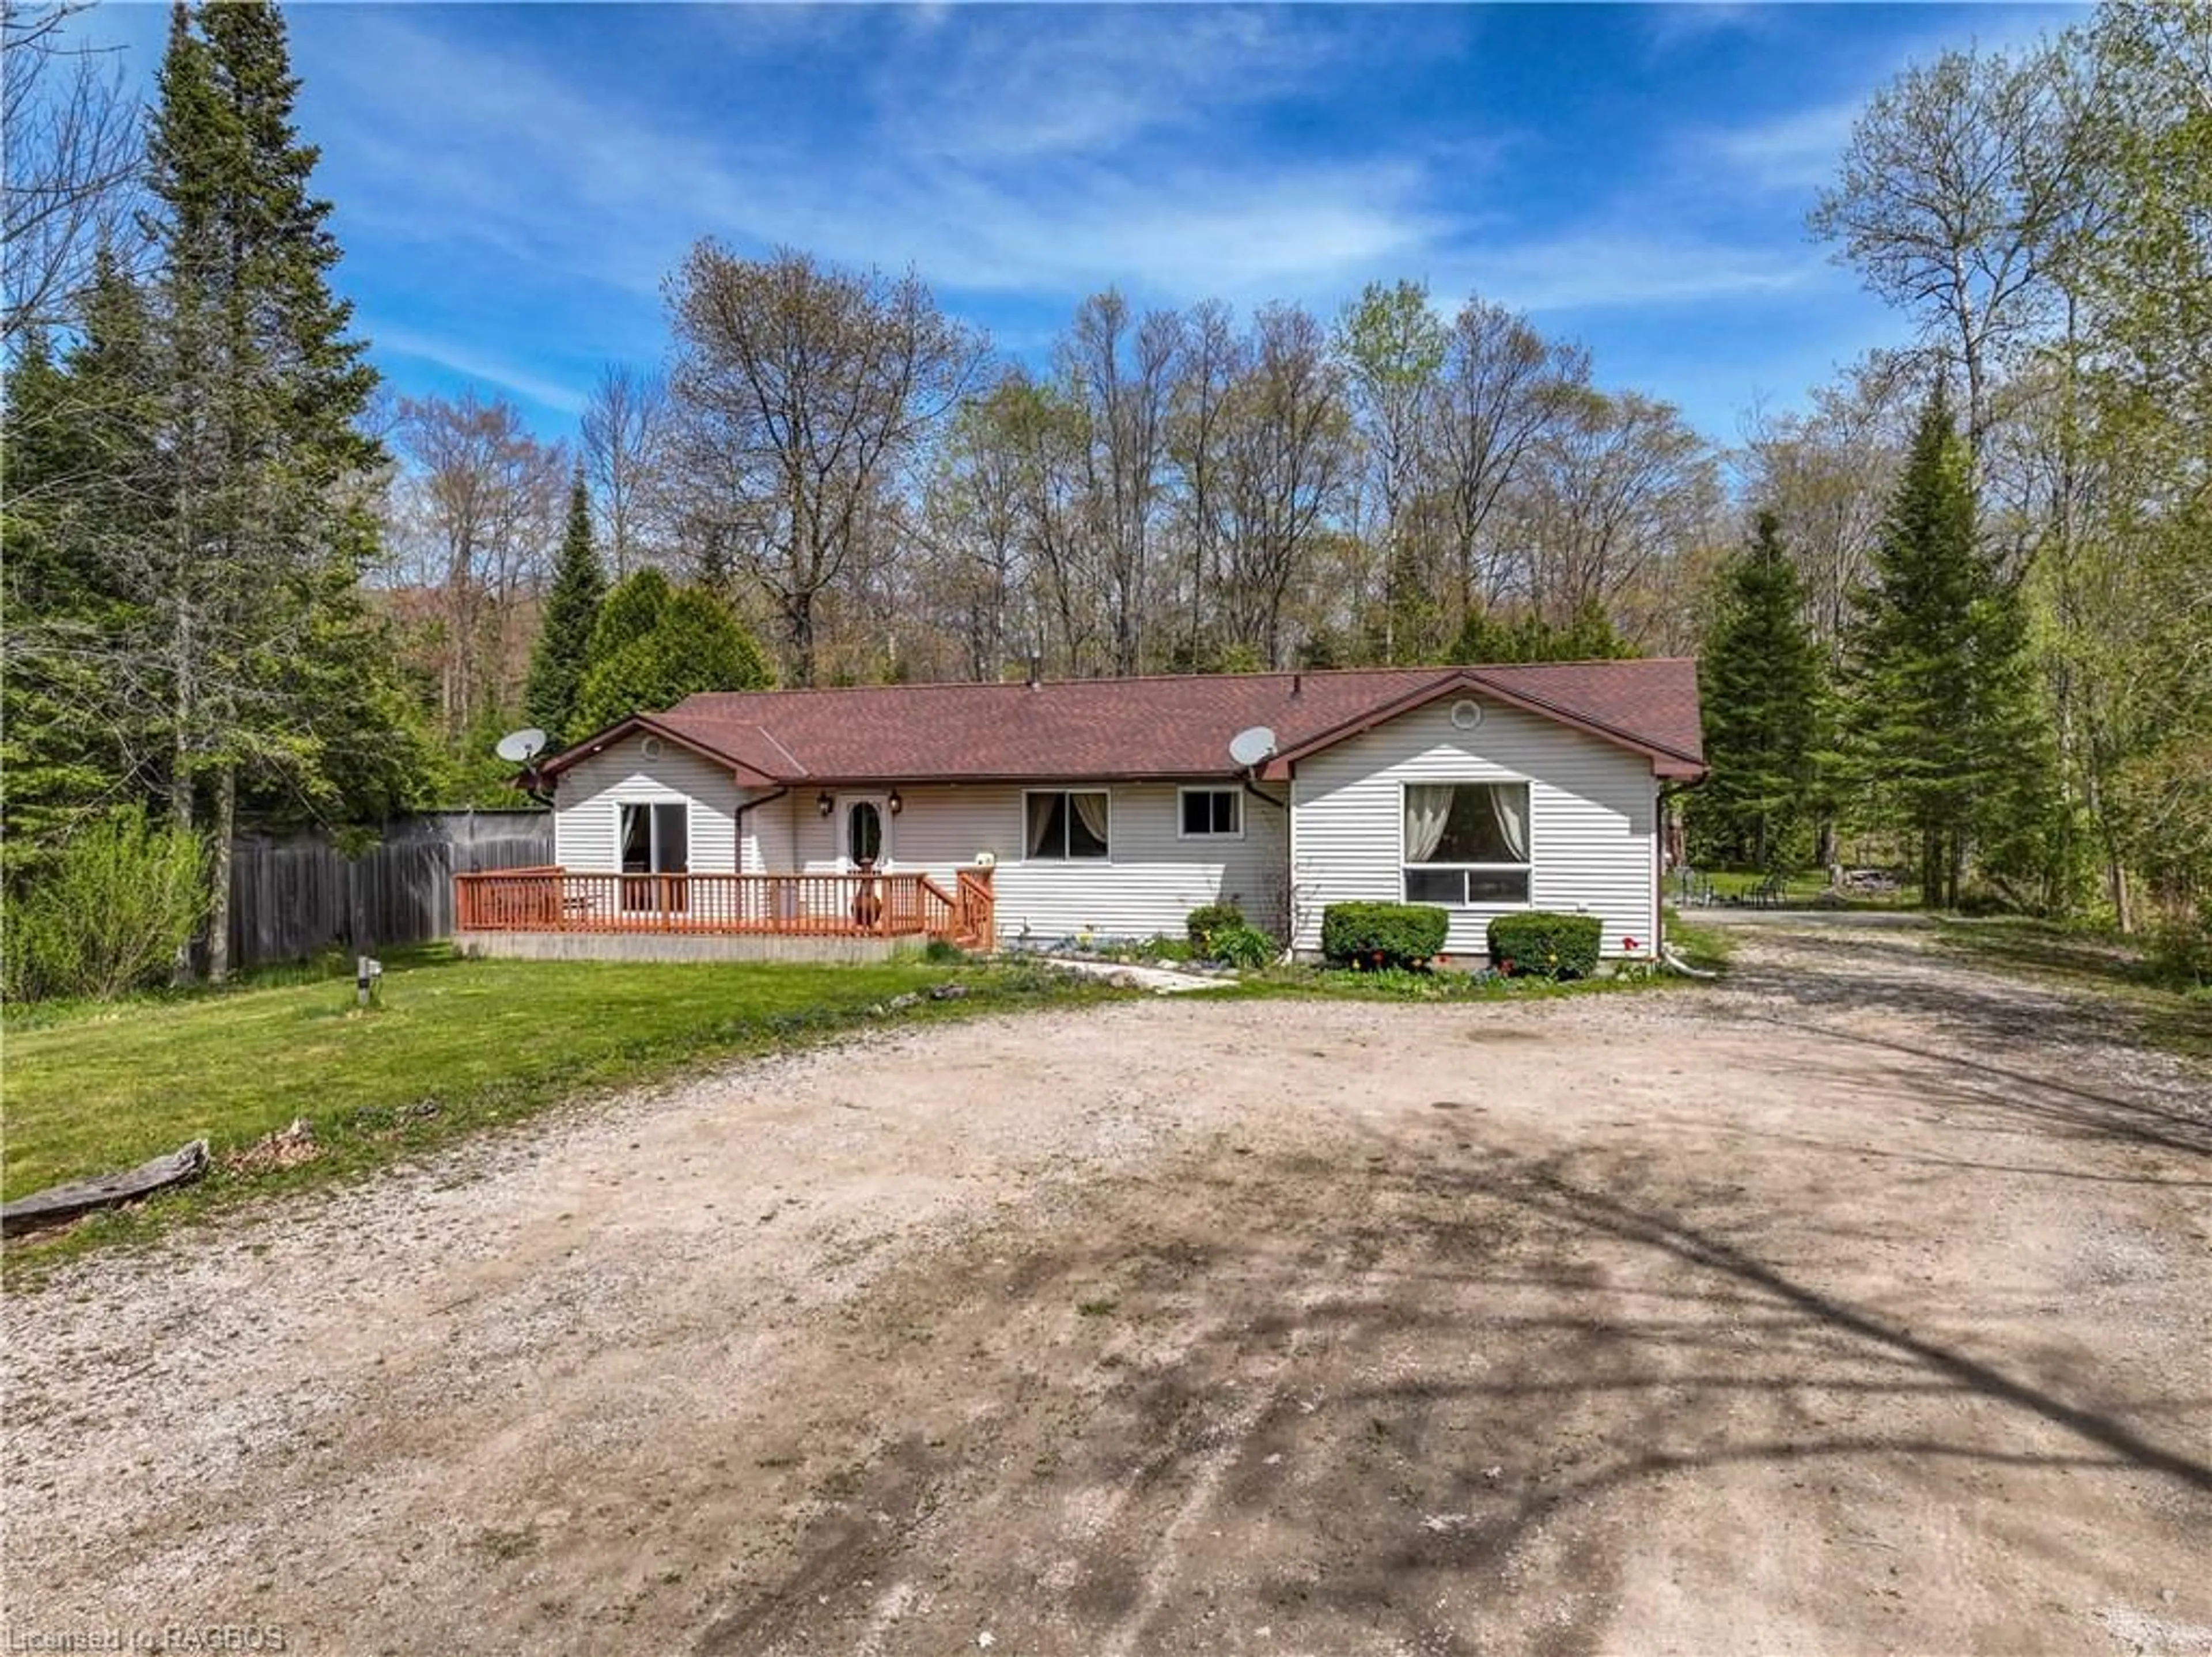 Frontside or backside of a home for 27 Hemlock Rd, Oliphant Ontario N0H 2T0